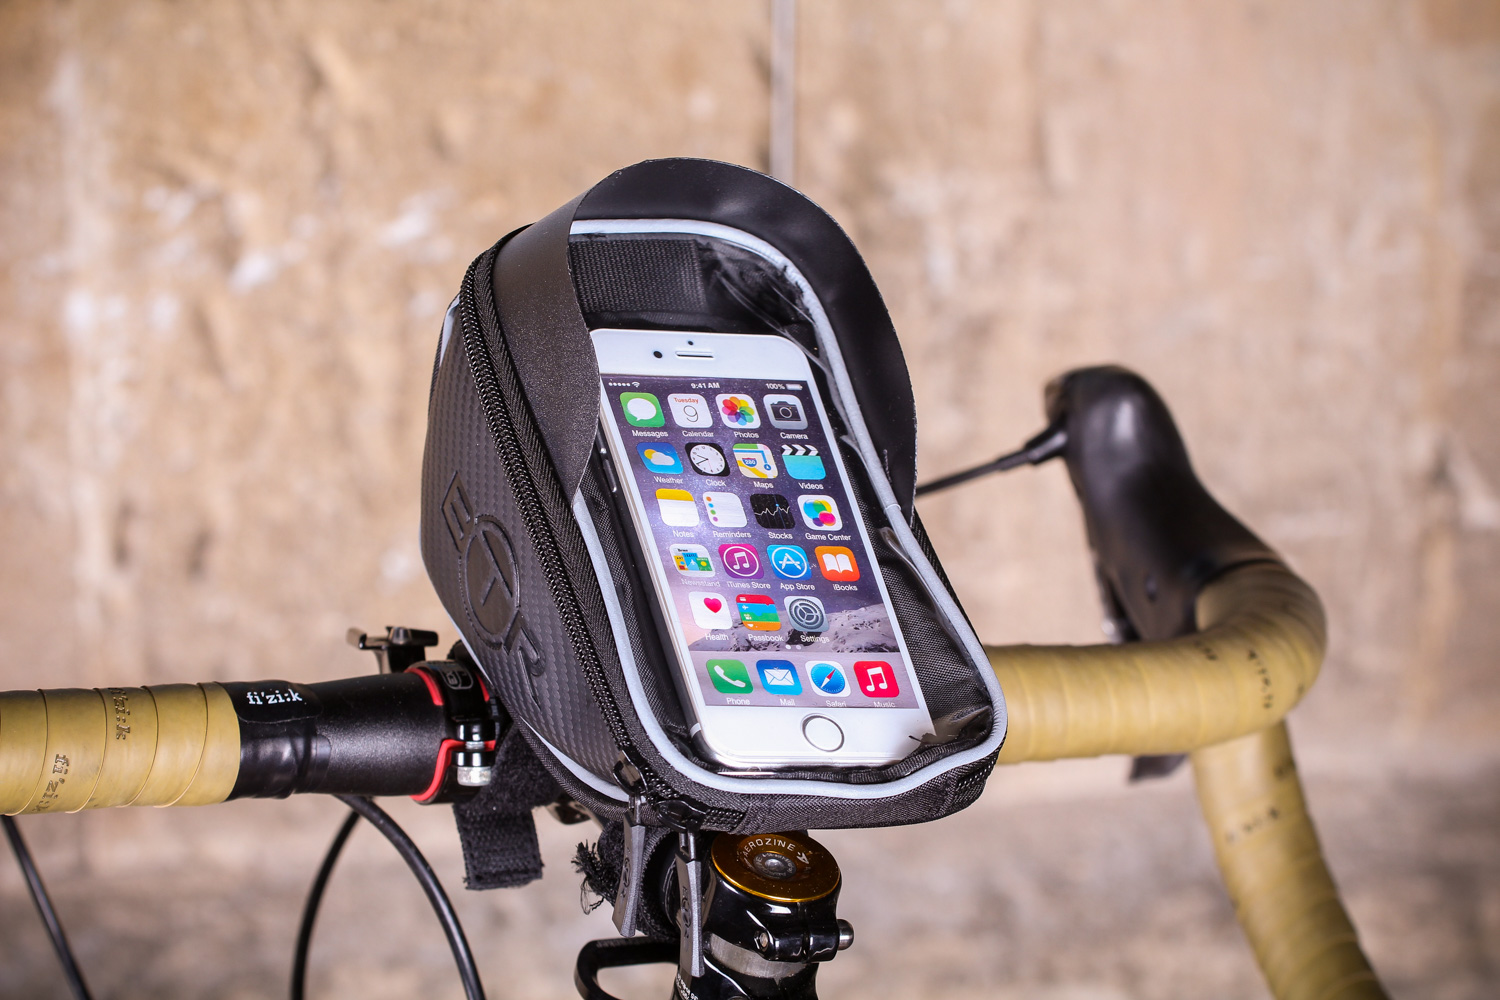 from brand PRECORN in black Navi Cell Phone etc Mobile phone bike bag in size M for mounting on handlebars mobile holder steering wheel mount with waterproof bag Universal for Smartphones GPS